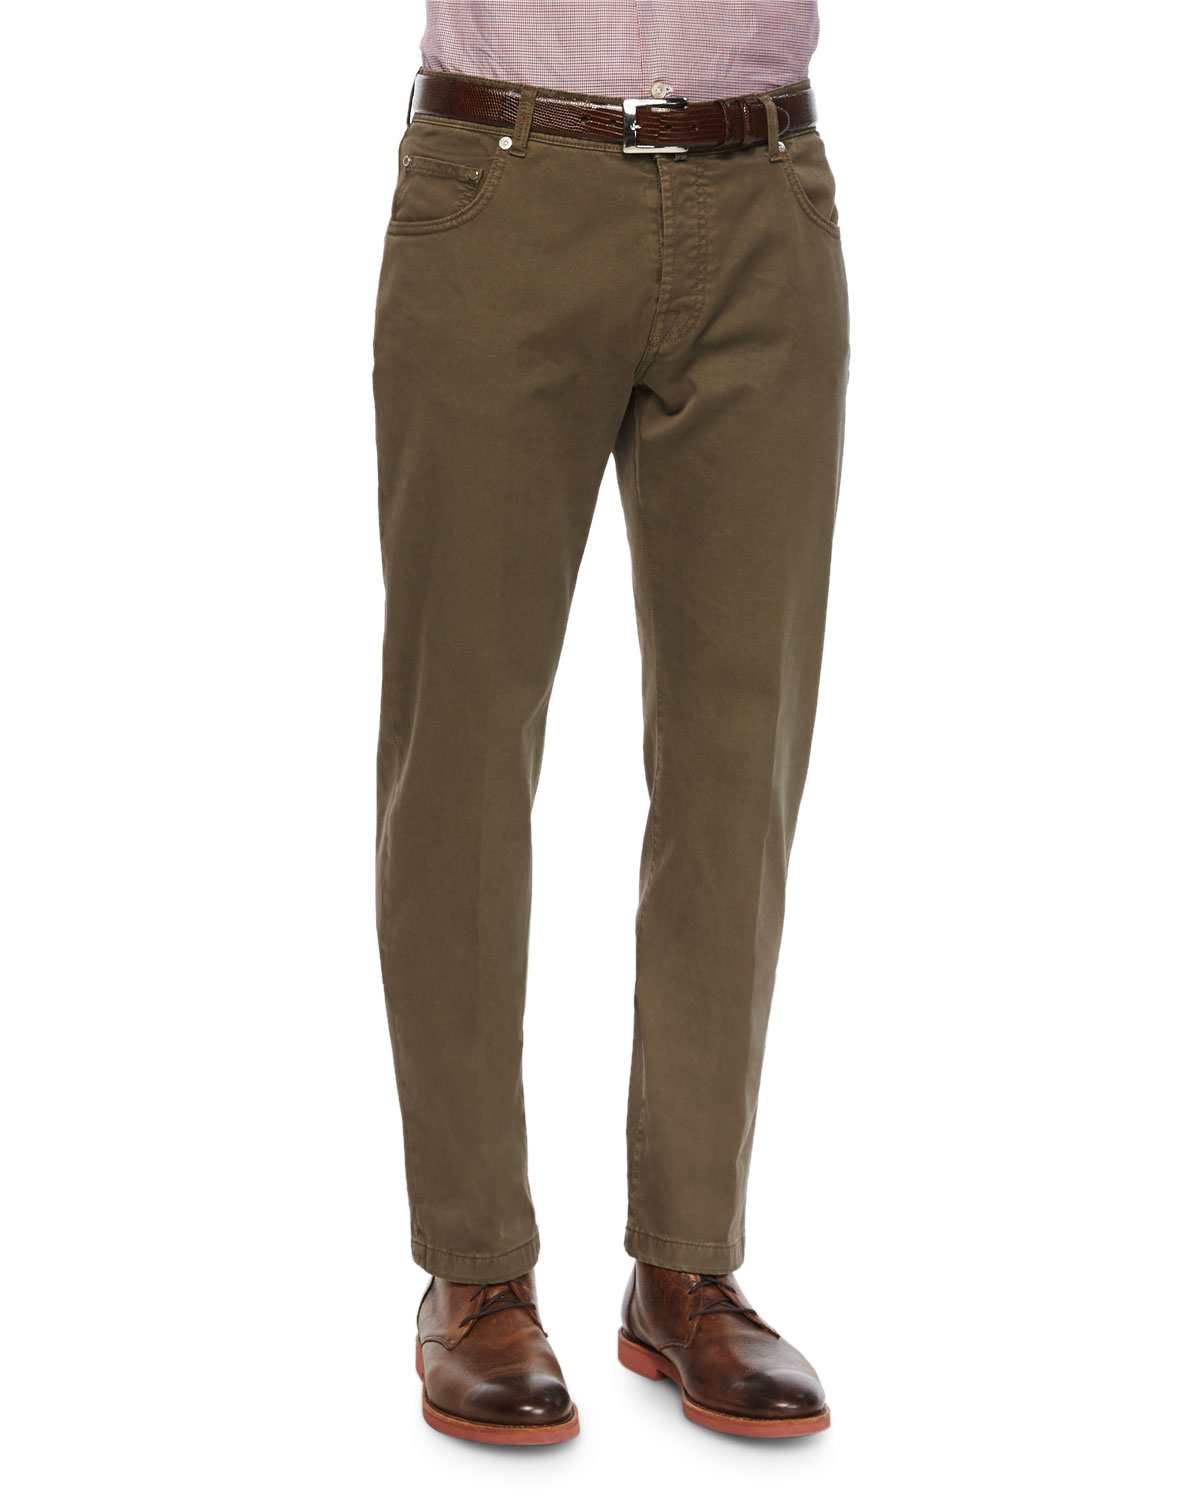 Lyst - Kiton Twill Five-pocket Pants in Green for Men